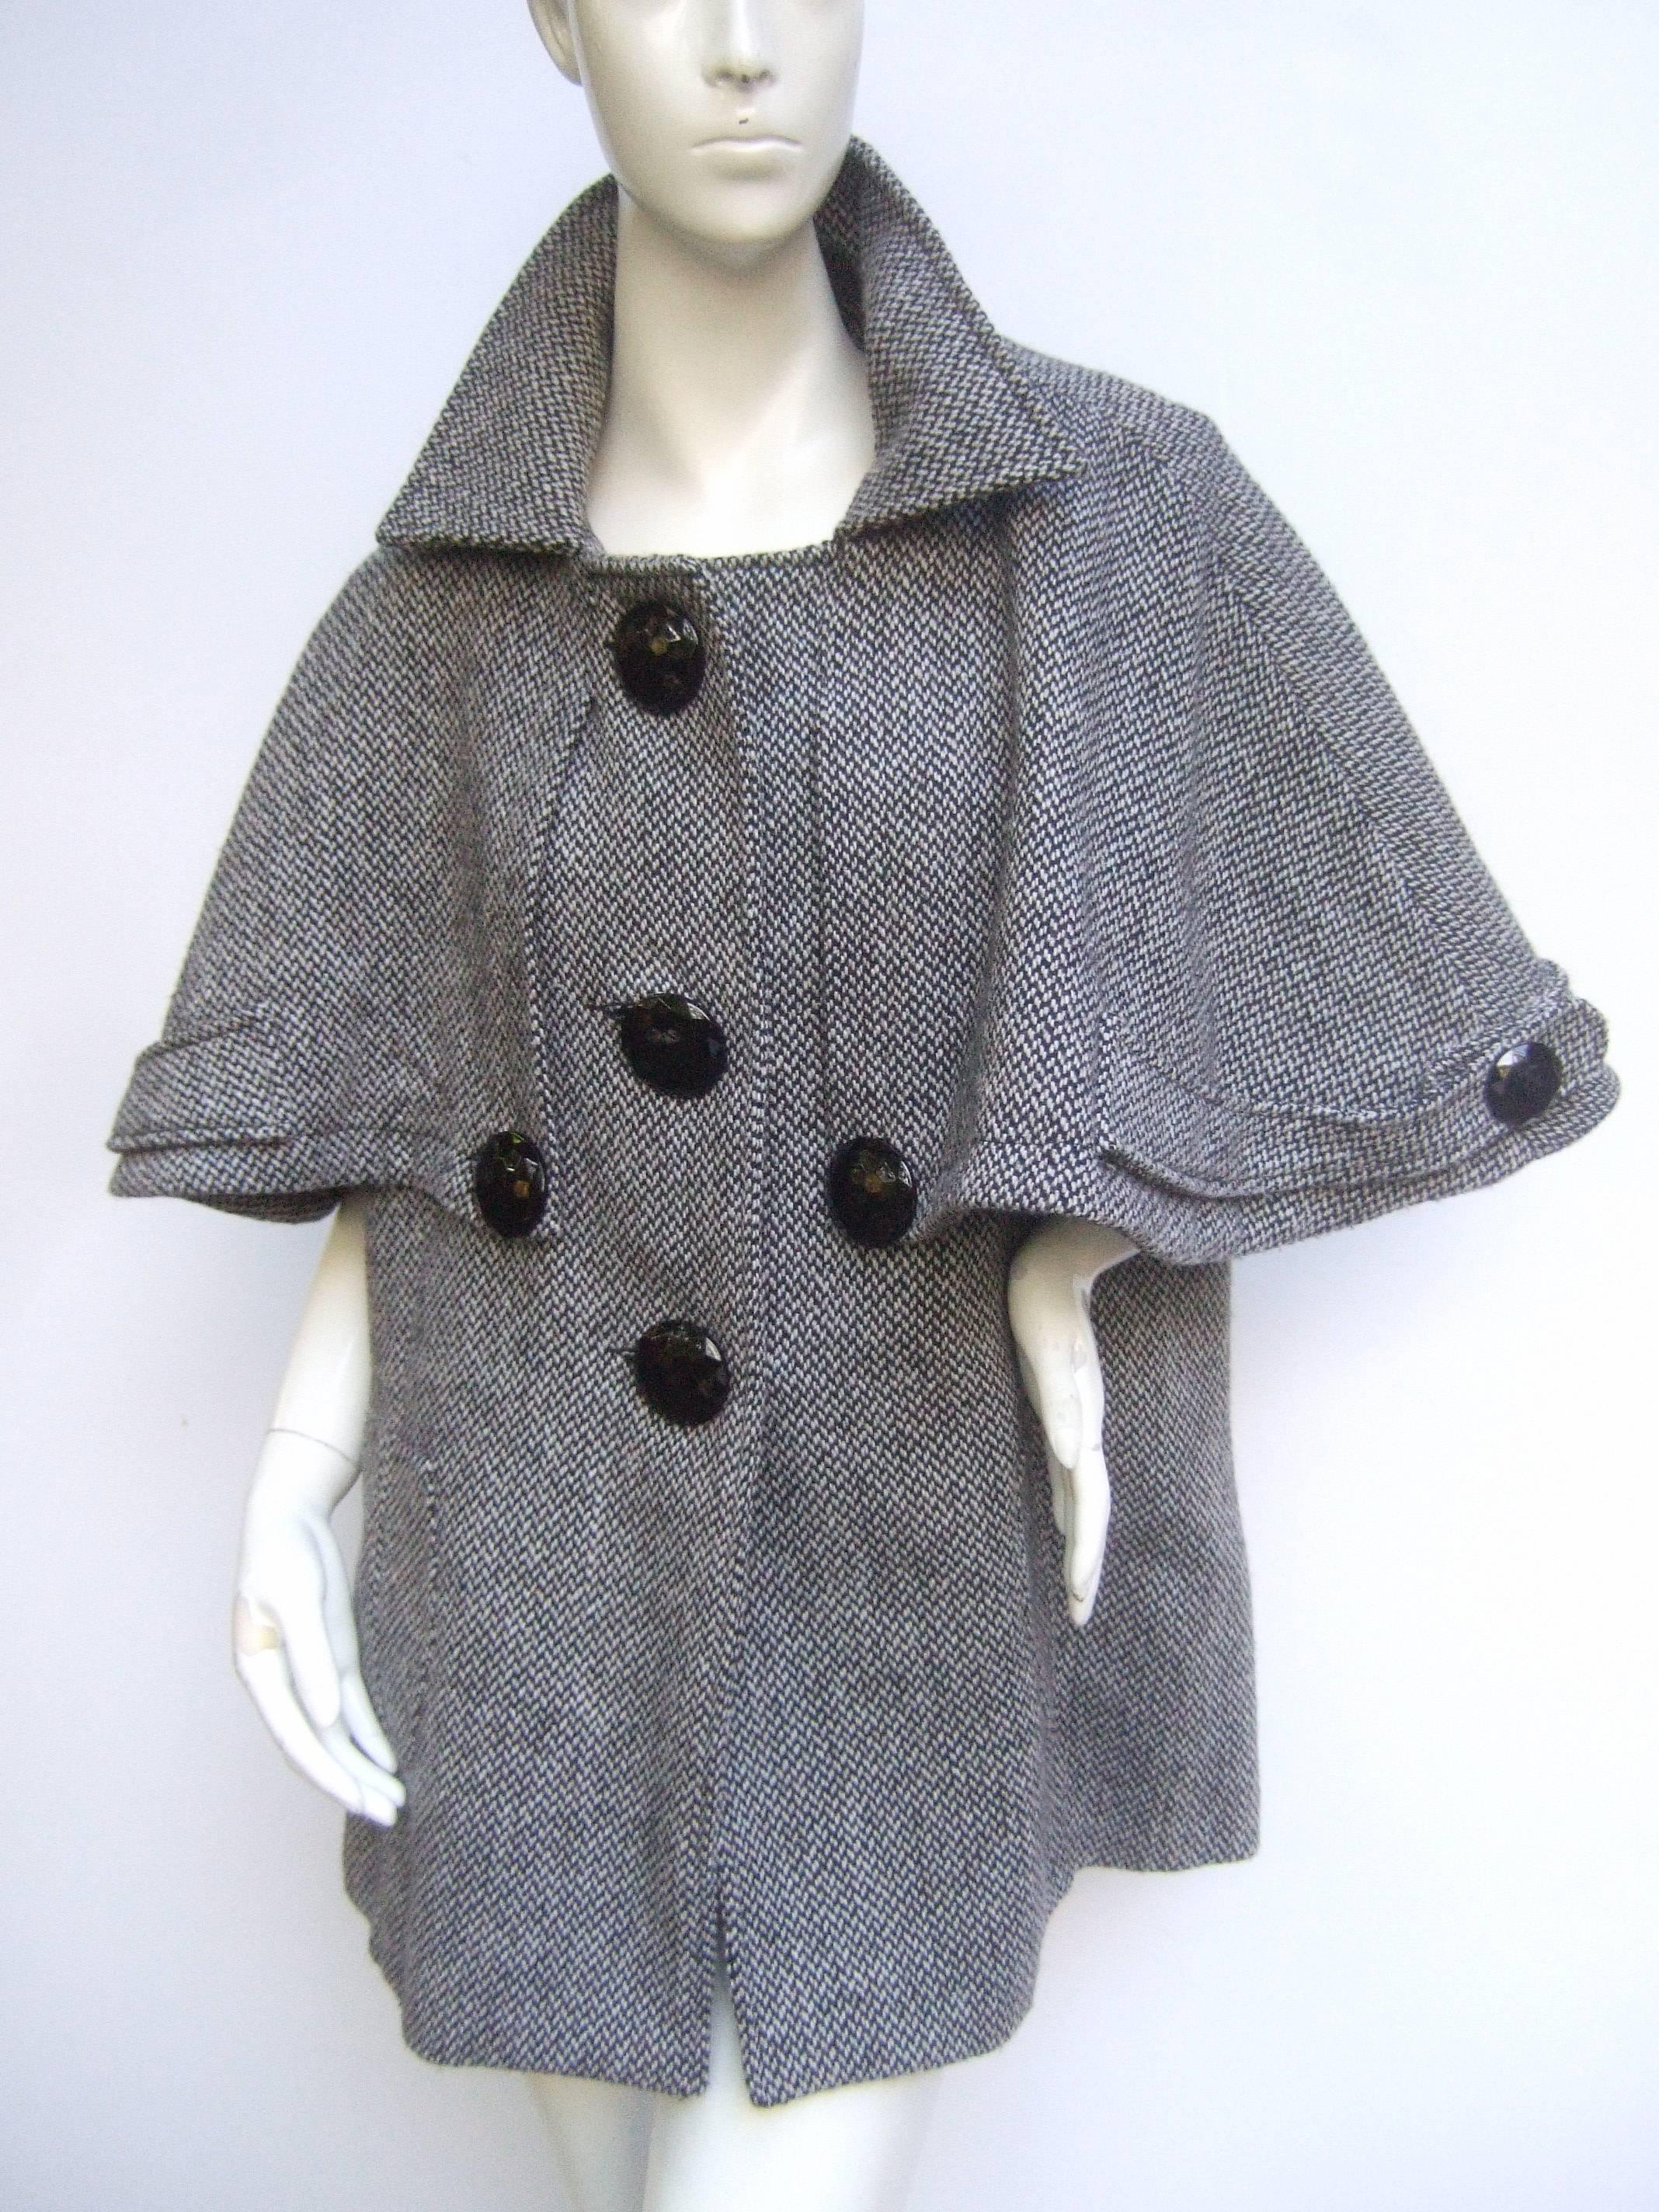 Stylish unique capelet herringbone wool blend 3/4 coat
The high fashion short length coat /cape is designed
with wide flared cape style shoulders

The capelet style coat is adorned with large
circular black faceted buttons. The salt and
pepper